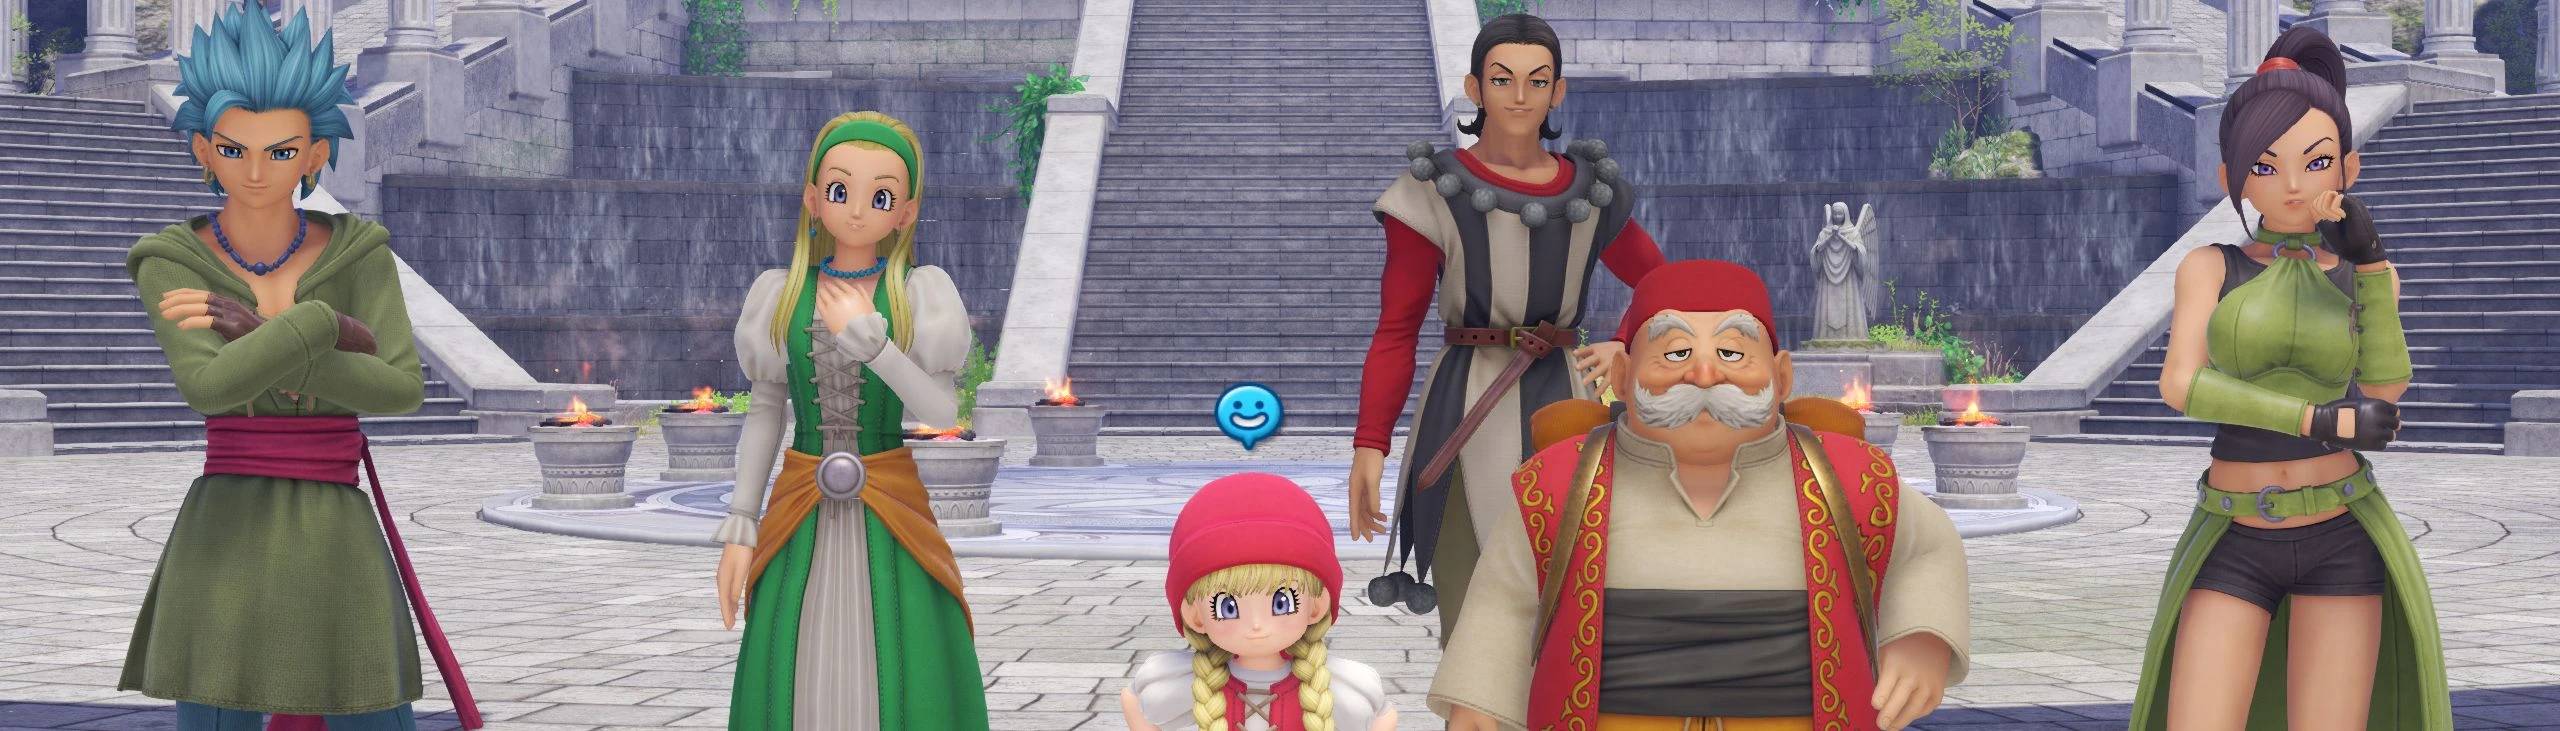 How Dragon Quest XI Came to Life with Unreal Engine 4